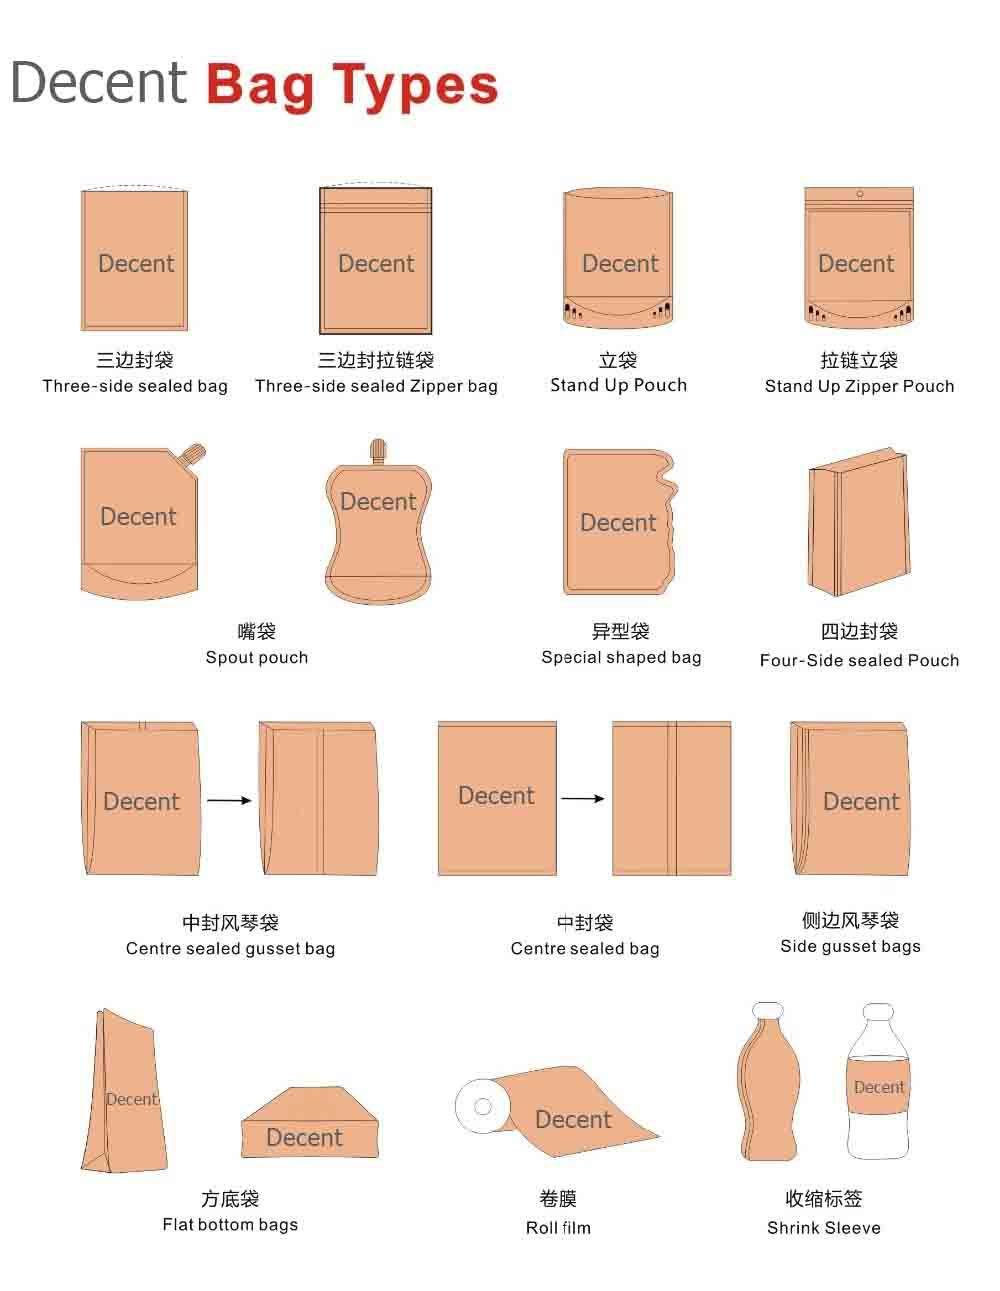 Printed Logo Transparent Window Plastic Packaging Bags with Spout for Cleaning Liquid Packaging